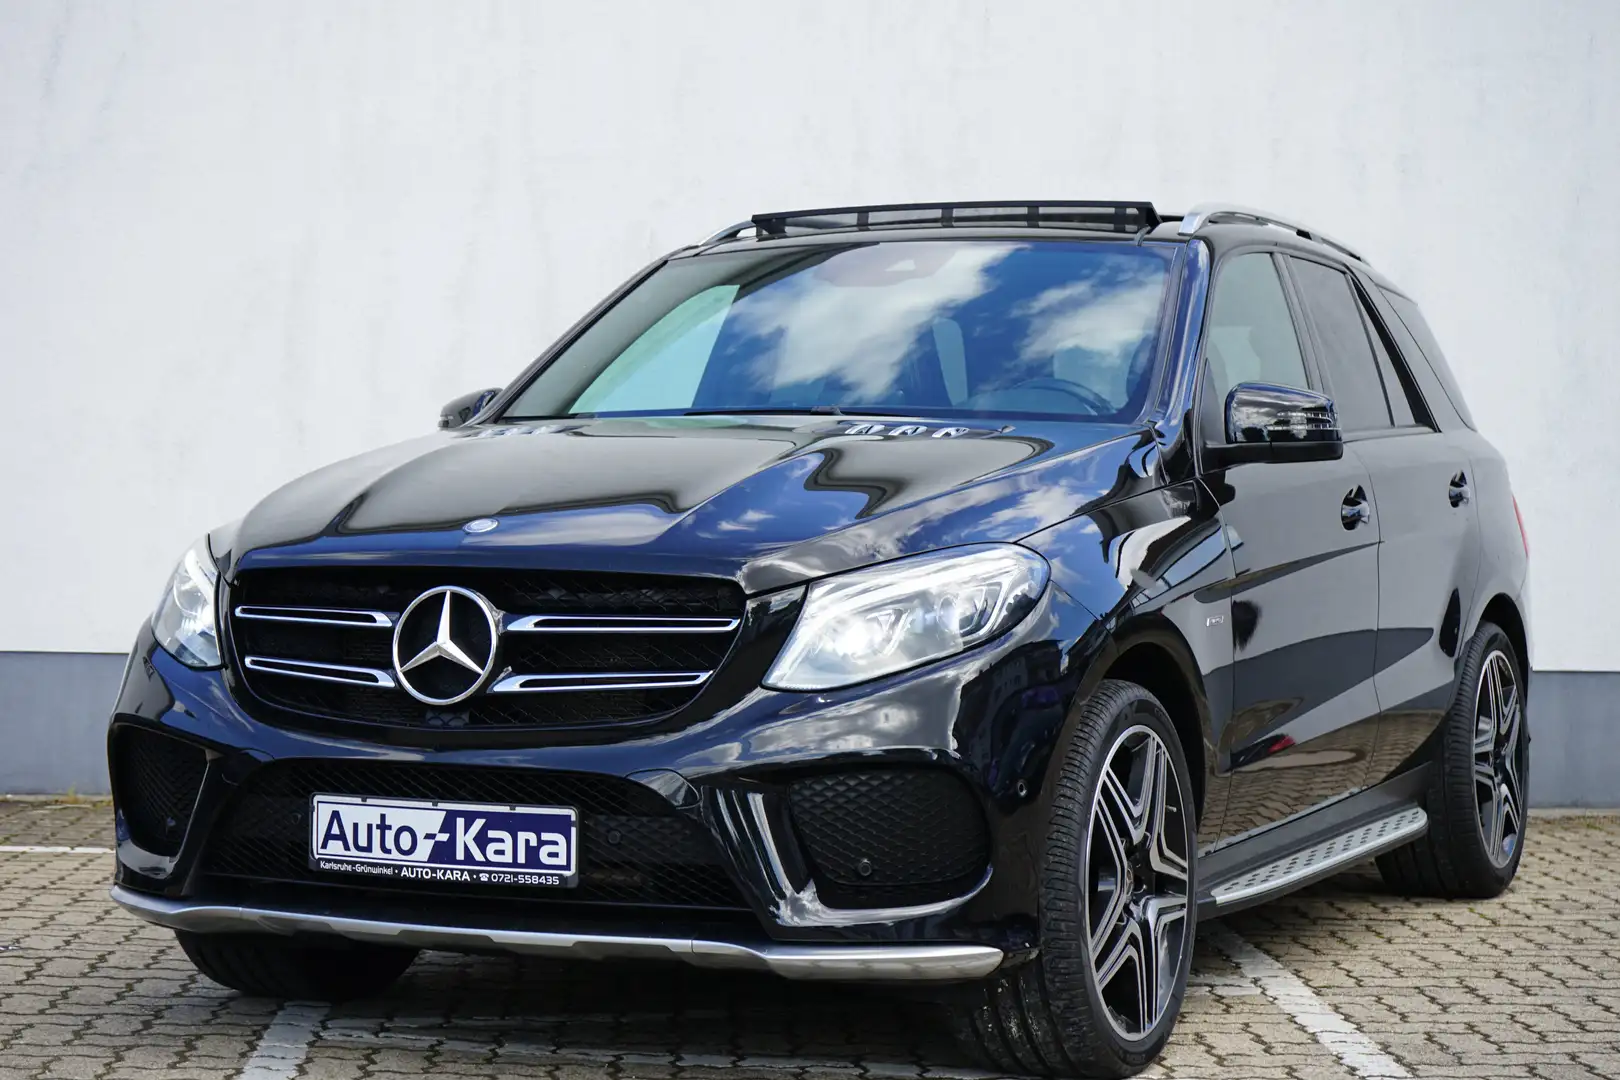 Mercedes-Benz GLE 450 4MATIC*21 Zoll*Panorama*LED ILS*Standheizung*Voll Siyah - 1